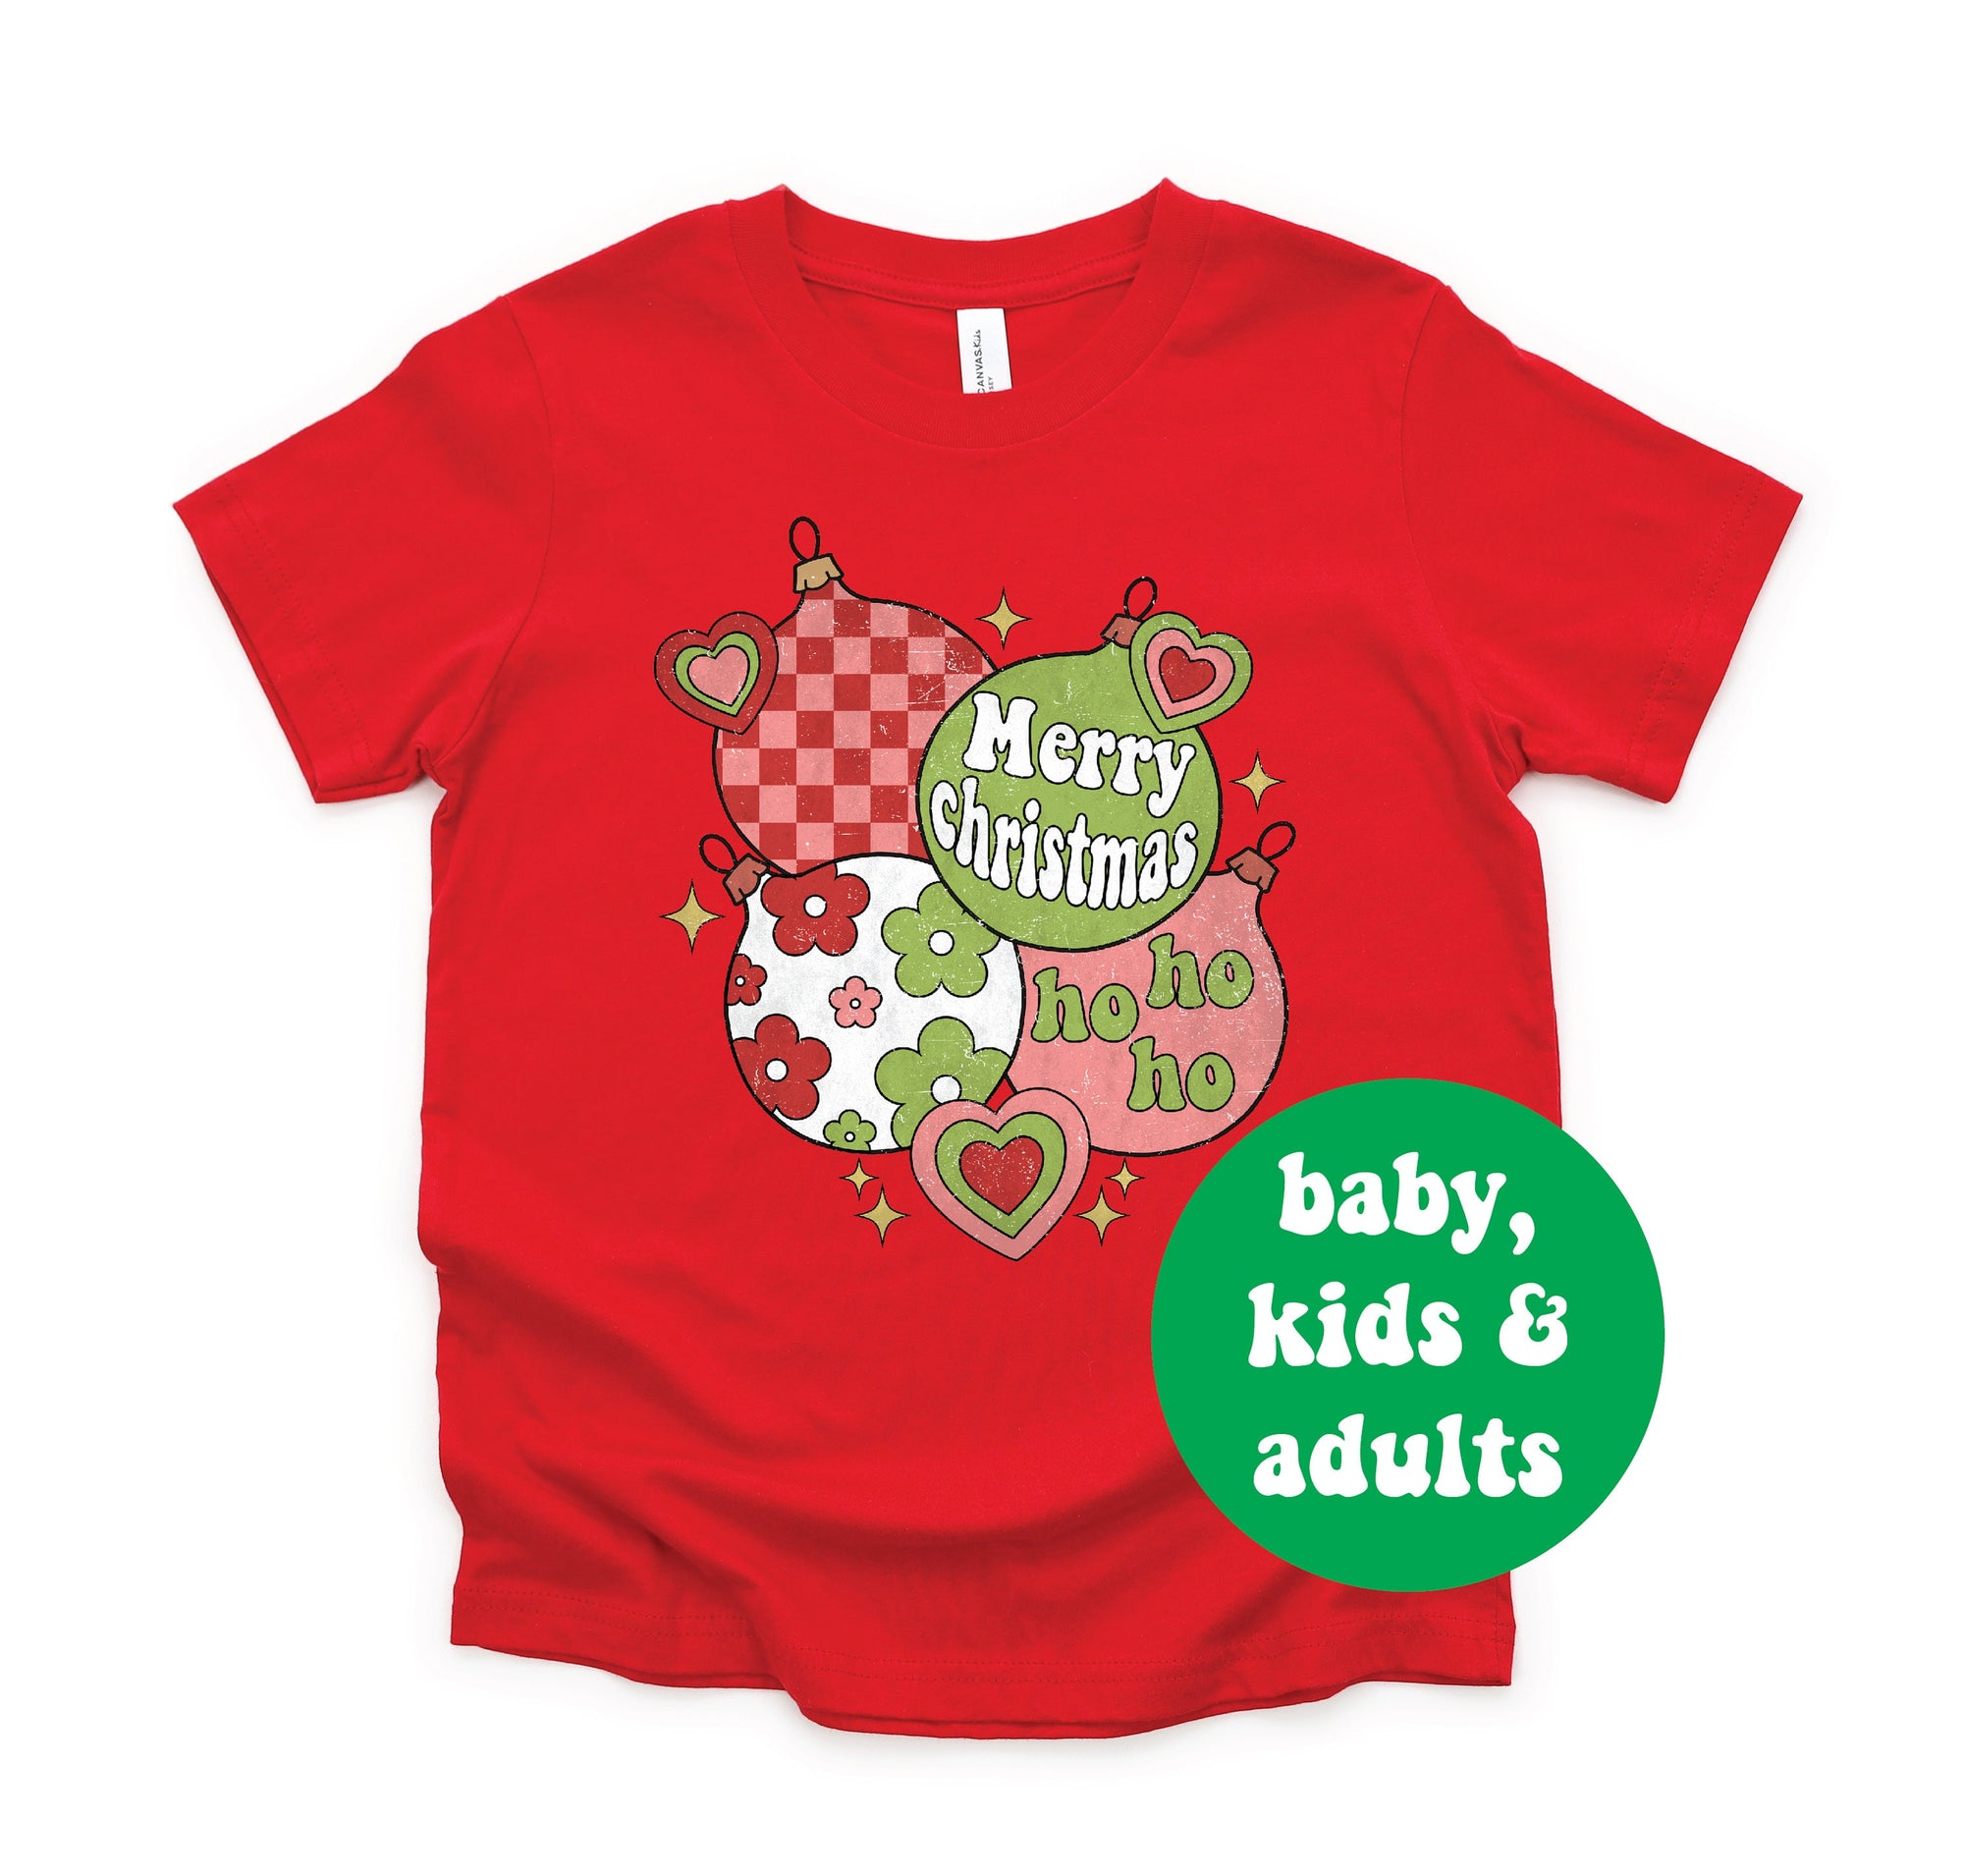 Merry Christmas Baubles T-Shirt, Merry Christmas T-Shirt, Retro Christmas T-Shirt, Merry Christmas Ho Ho Ho Shirt, Vintage Christmas TShirt